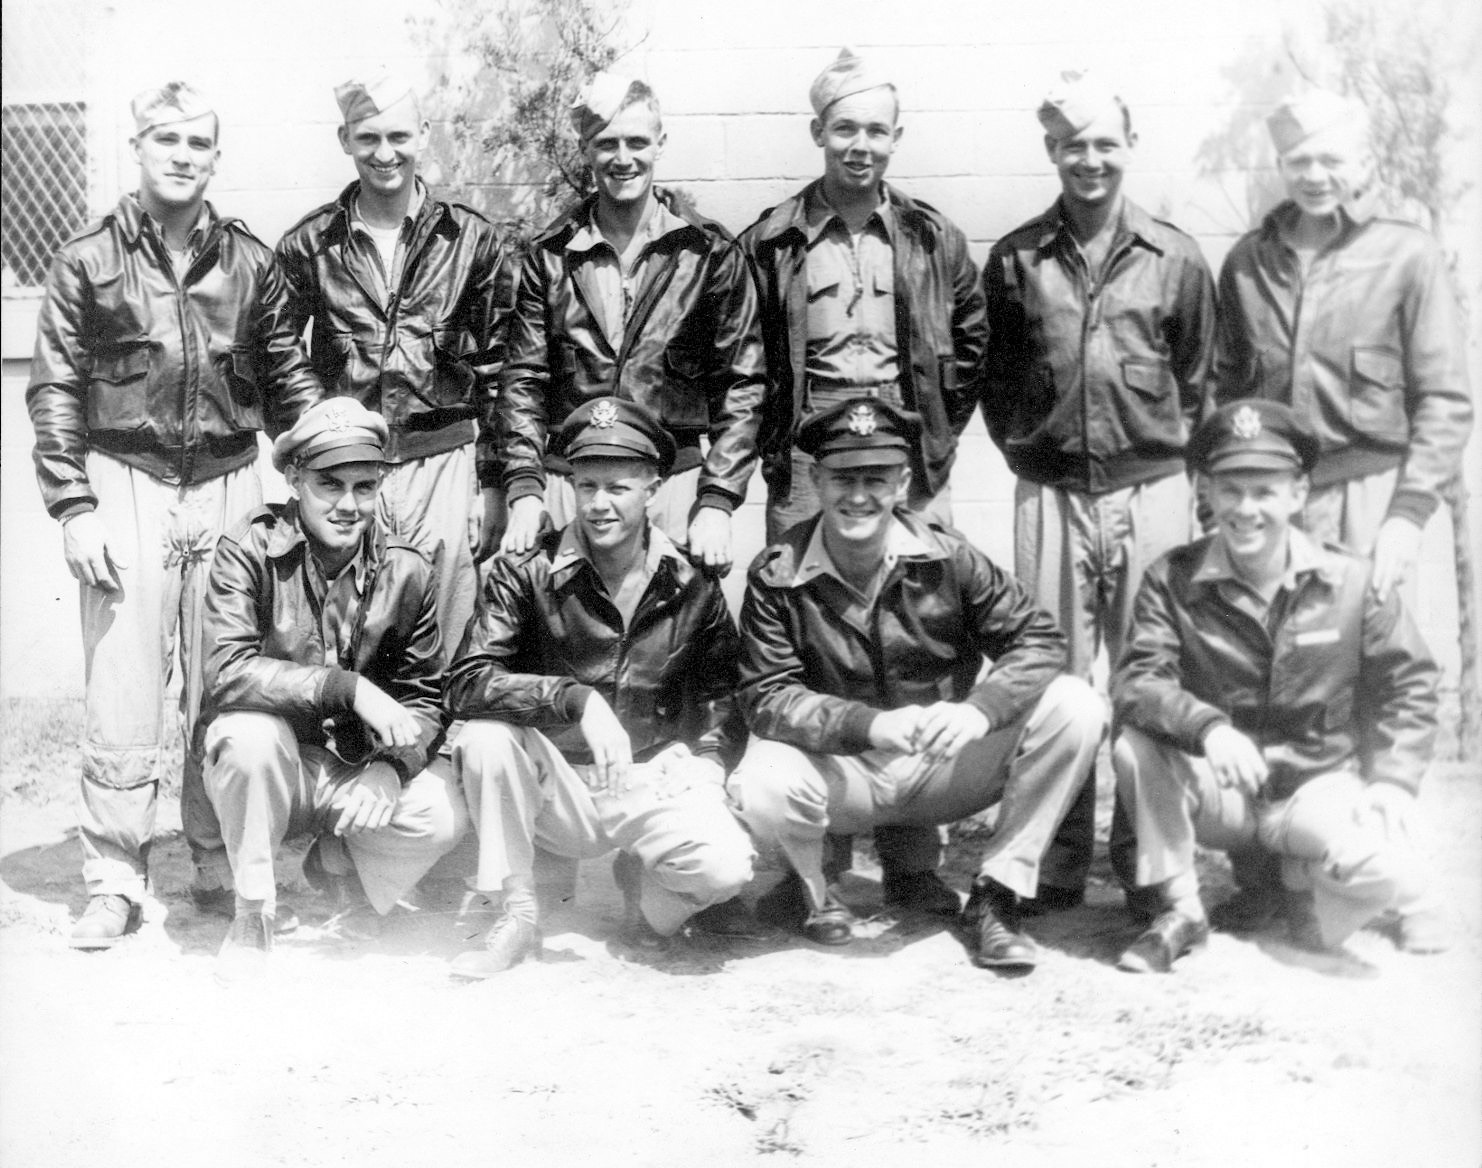 Hugh Hunter Hardwicke, Jr., and the crew of the B-17 Flying Fortress named “Uninvited” pose during a relaxation period. Uninvited and its crew were attached to the 568th Squadron of the 390th Bombardment Group. On the front row (left to right) are 2nd Lt. Gordon R. (Flick) Flickema, co-pilot (Cleveland, Ohio); 1st Lt. Hugh H. Hardwicke, Jr., pilot (Richmond, Va.); 2nd Lt. Charles (Chick) Papousek, bombardier (Chicago, Ill.); and 2nd Lt. Moody S. (Jack) Jackson, Jr., navigator (Houston, Texas). Standing (left to right) are Staff Sgt. John H. Hammond, waist gunner/armorer (Baltimore, Md.); Staff Sgt. Thomas F. Downham, ball turret gunner/assistant radio operator (Detroit, Mich.); Staff Sgt. John R. McCaw, waist gunner; Tech. Sgt. Wayman O. Avery, top turret gunner/engineer (San Francisco, Calif.); Staff Sgt. Denver L. (Pappy) Grogg, tail gunner/assistant armorer (Richmond, Ind.); and Tech. Sgt. Howard D. (Dale) Weaver, radio operator/gunner (Royalty, Texas). After Eighth Air Force bomber crews were reduced to nine in early July 1944, McCaw was transferred to another unit and did not fly combat with Hardwicke.